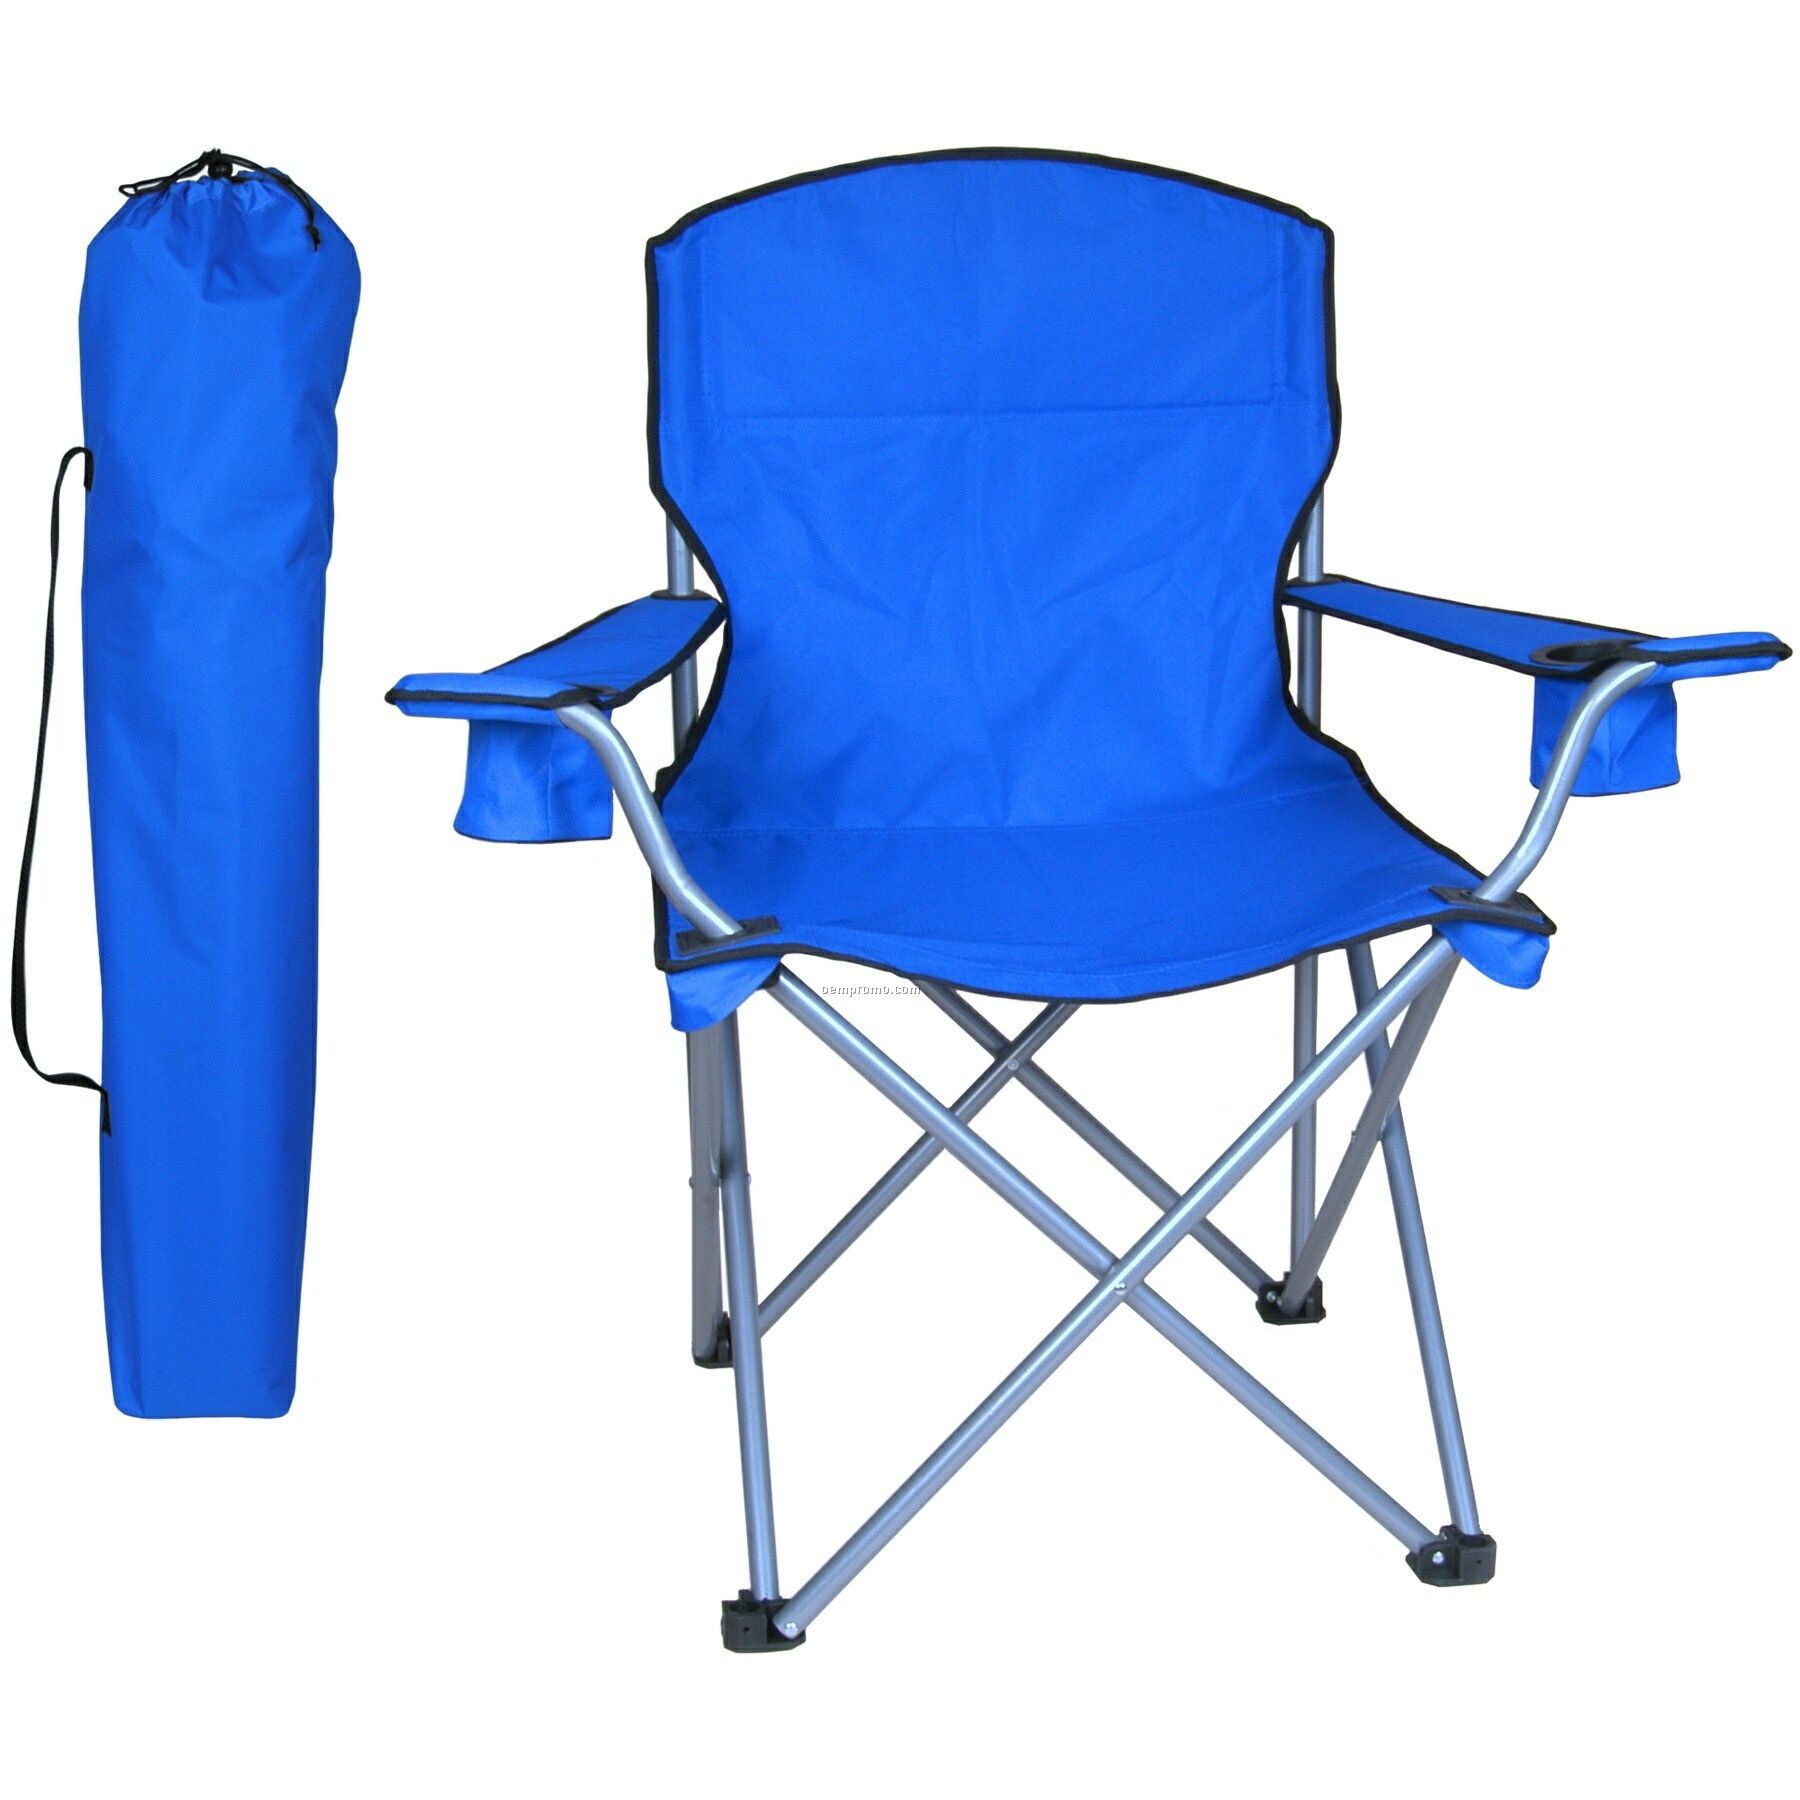 Large Folding Chair W/Arm Rests, 2 Cup Holders And Carry Bag- 330 Lb Rating